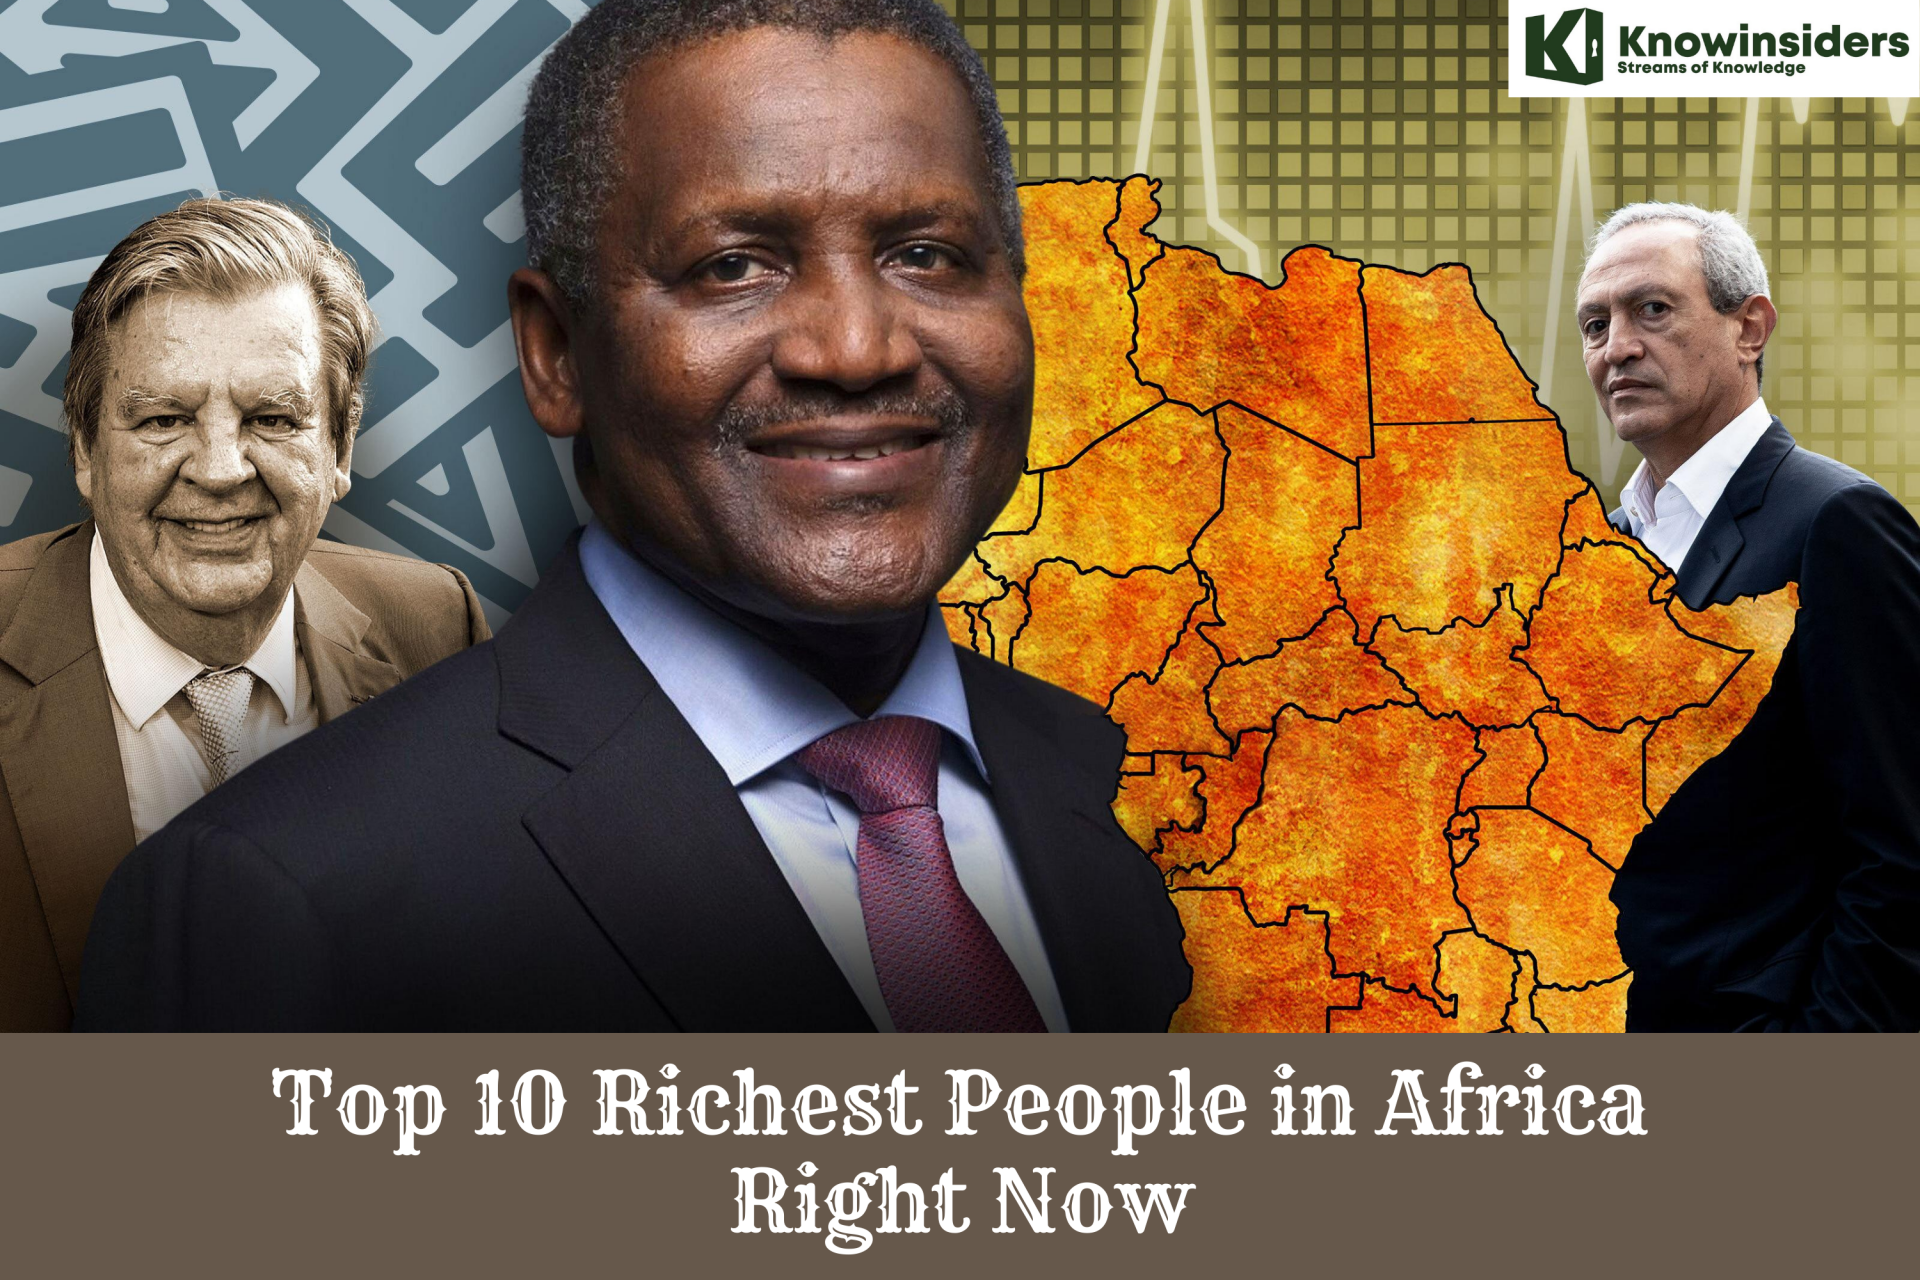 Top 10 Richest People in Africa Right Now - Ranked by Forbes